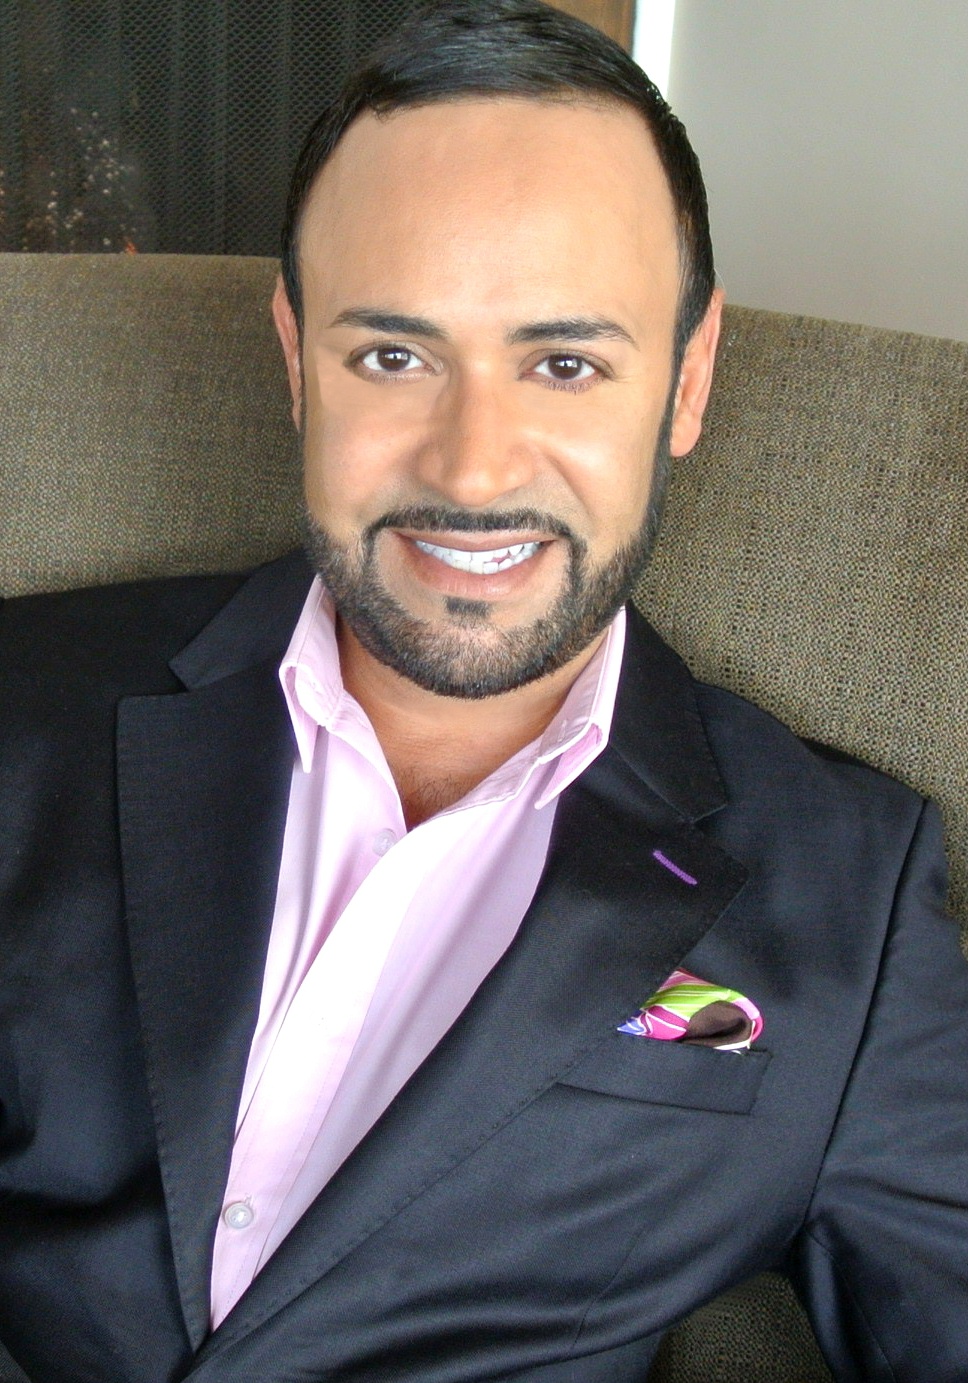 Nick Verreos dishes on Style Week Orange County and 2013 fall trends